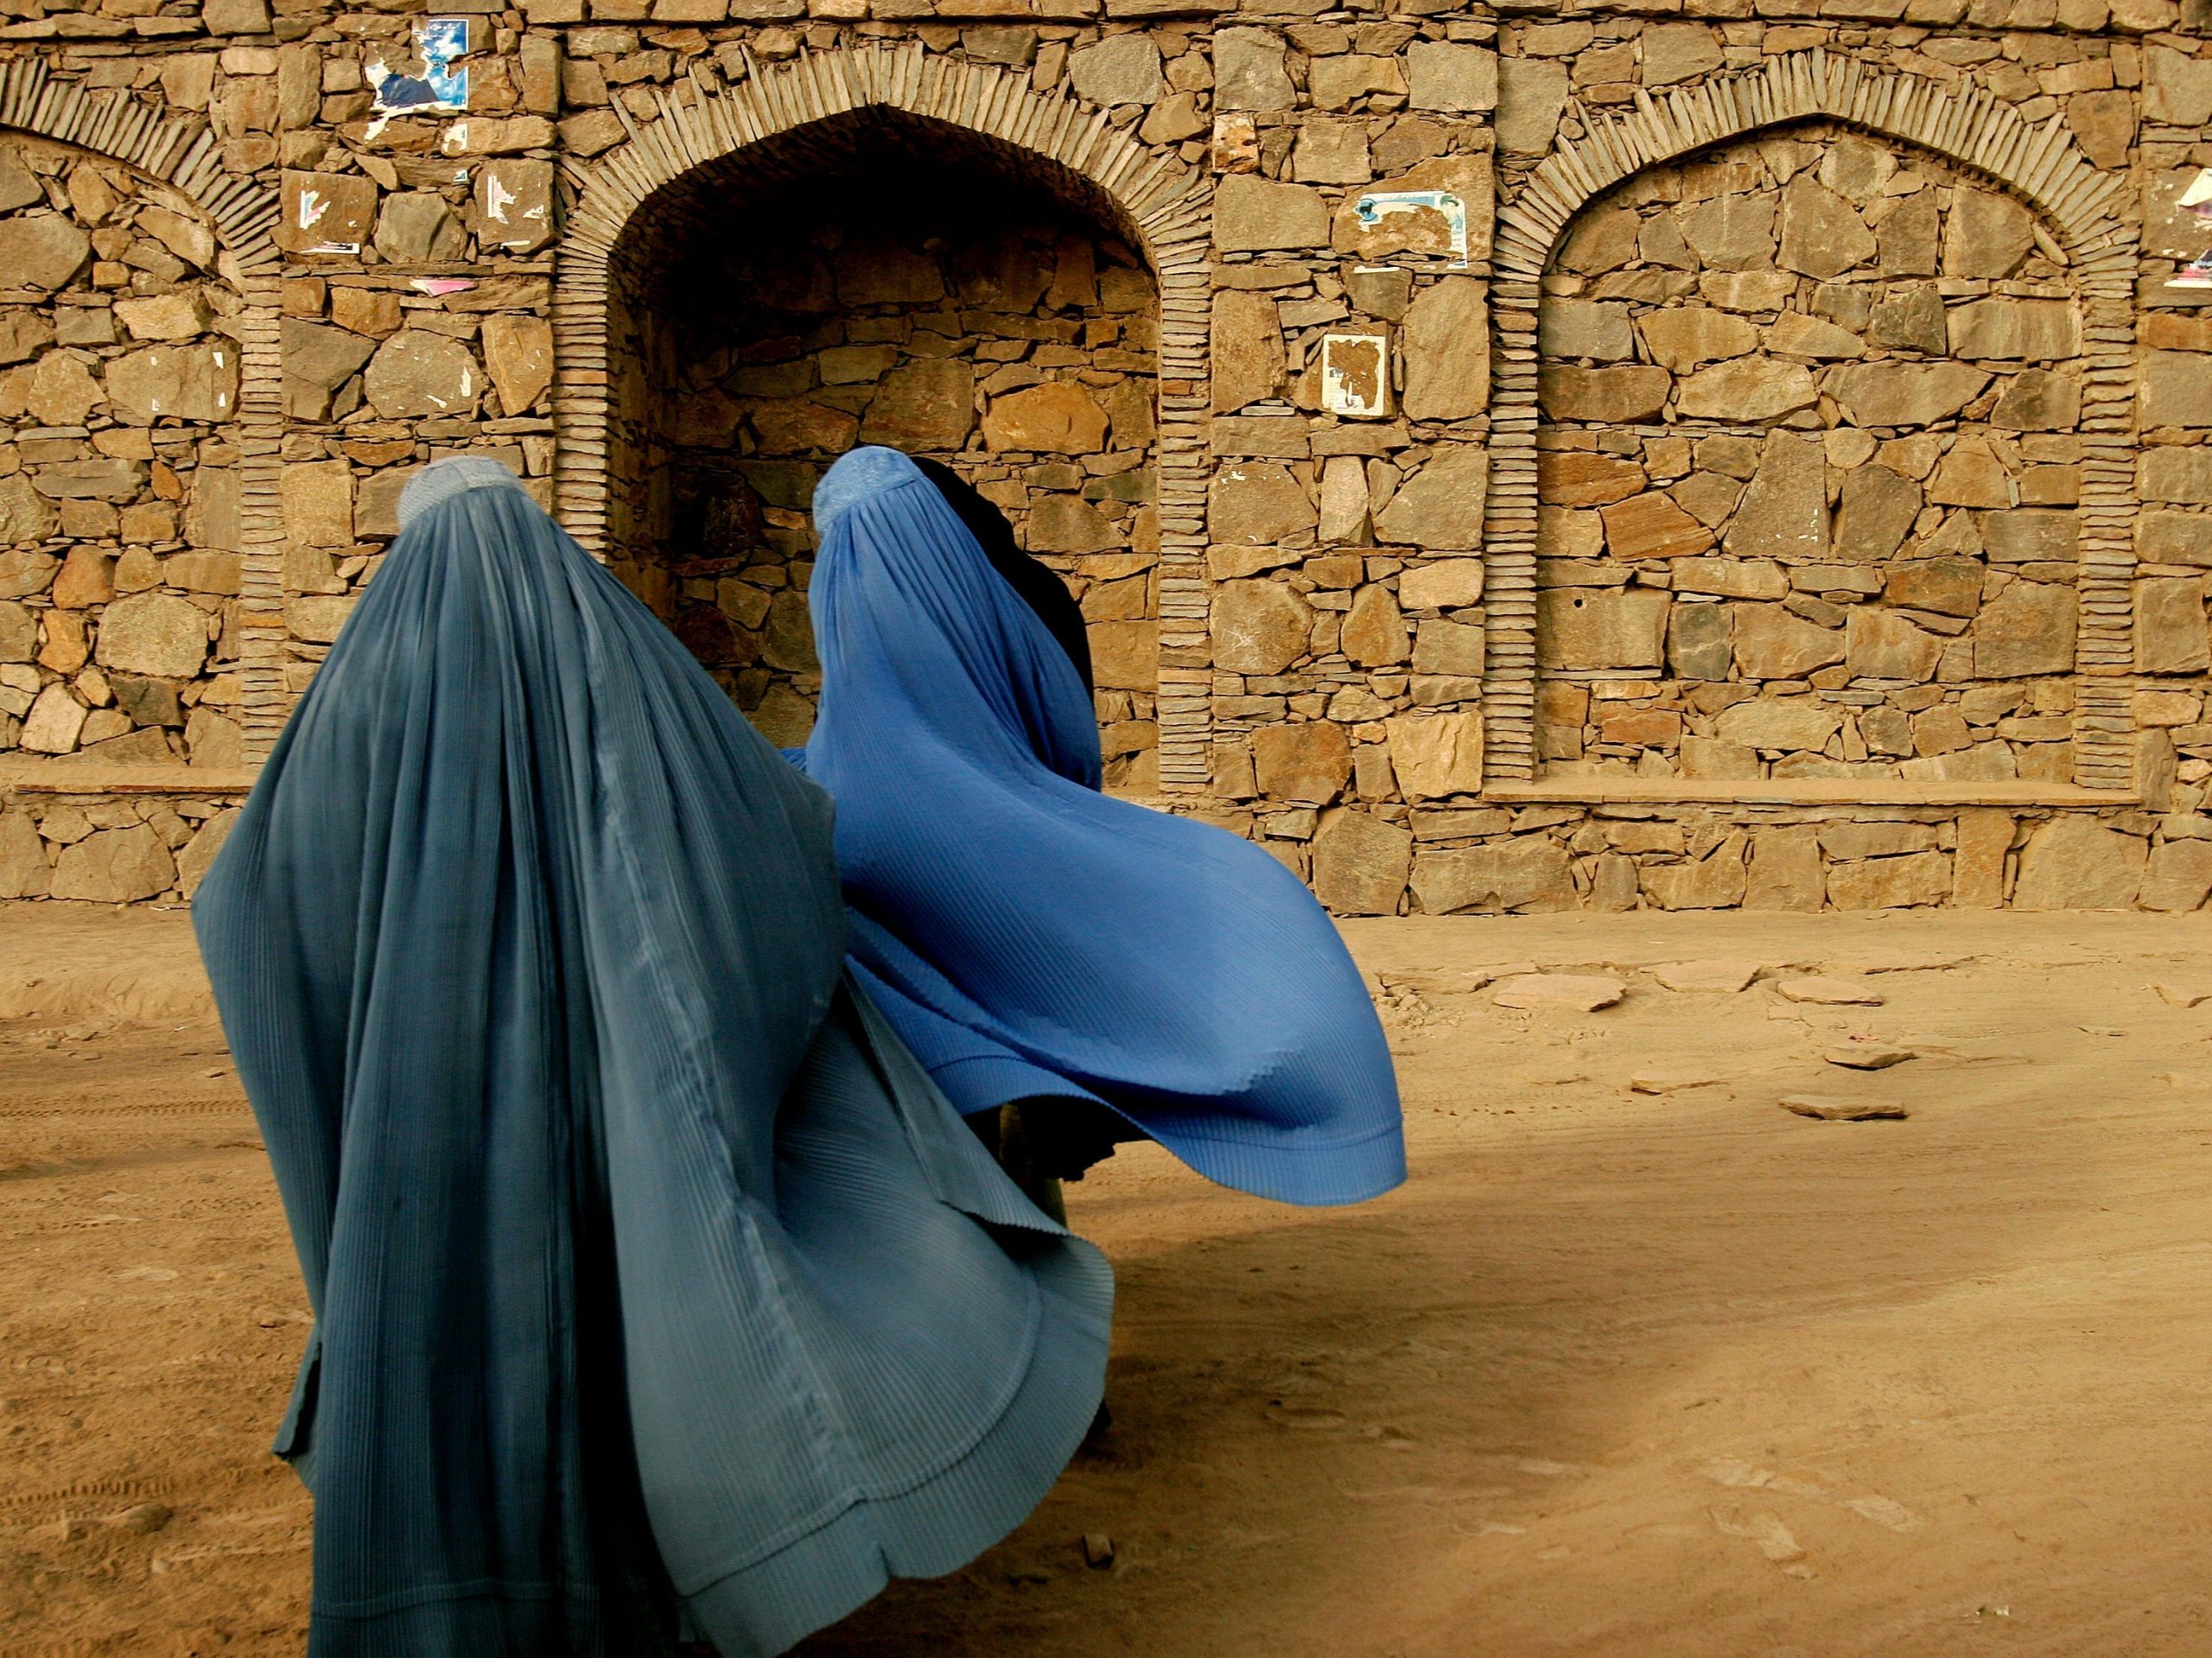 Two women wear blue burkas covering their entire bodies in kabul with a stone wall behind them